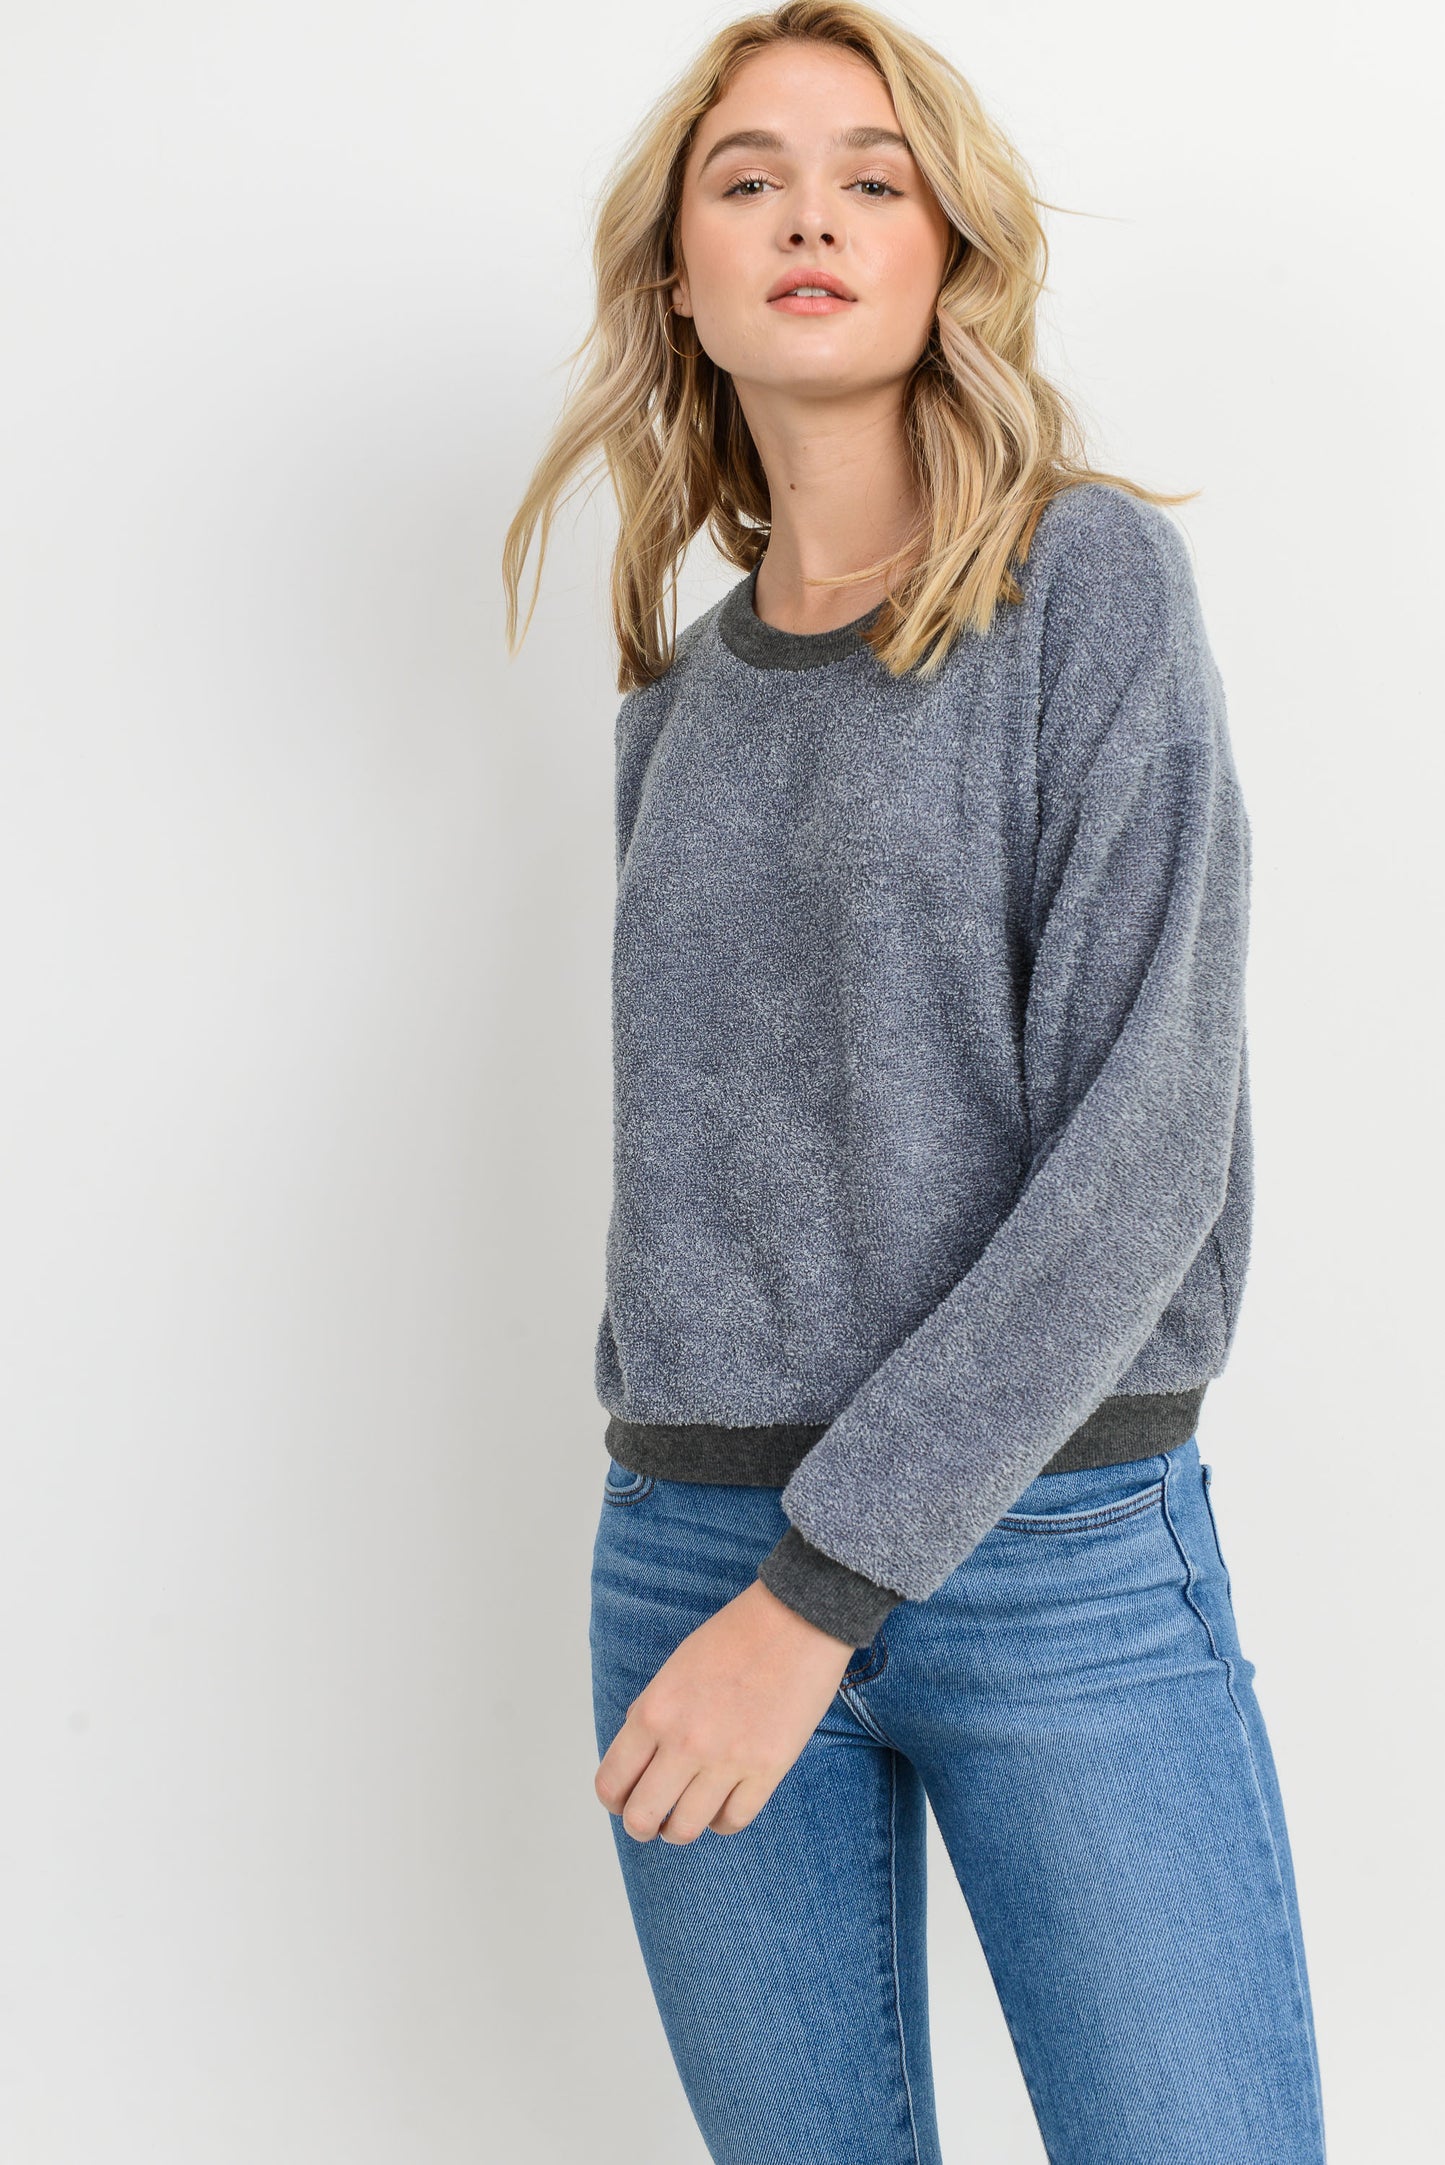 Textured Knit Rib Trimed Long Sleeve Top!